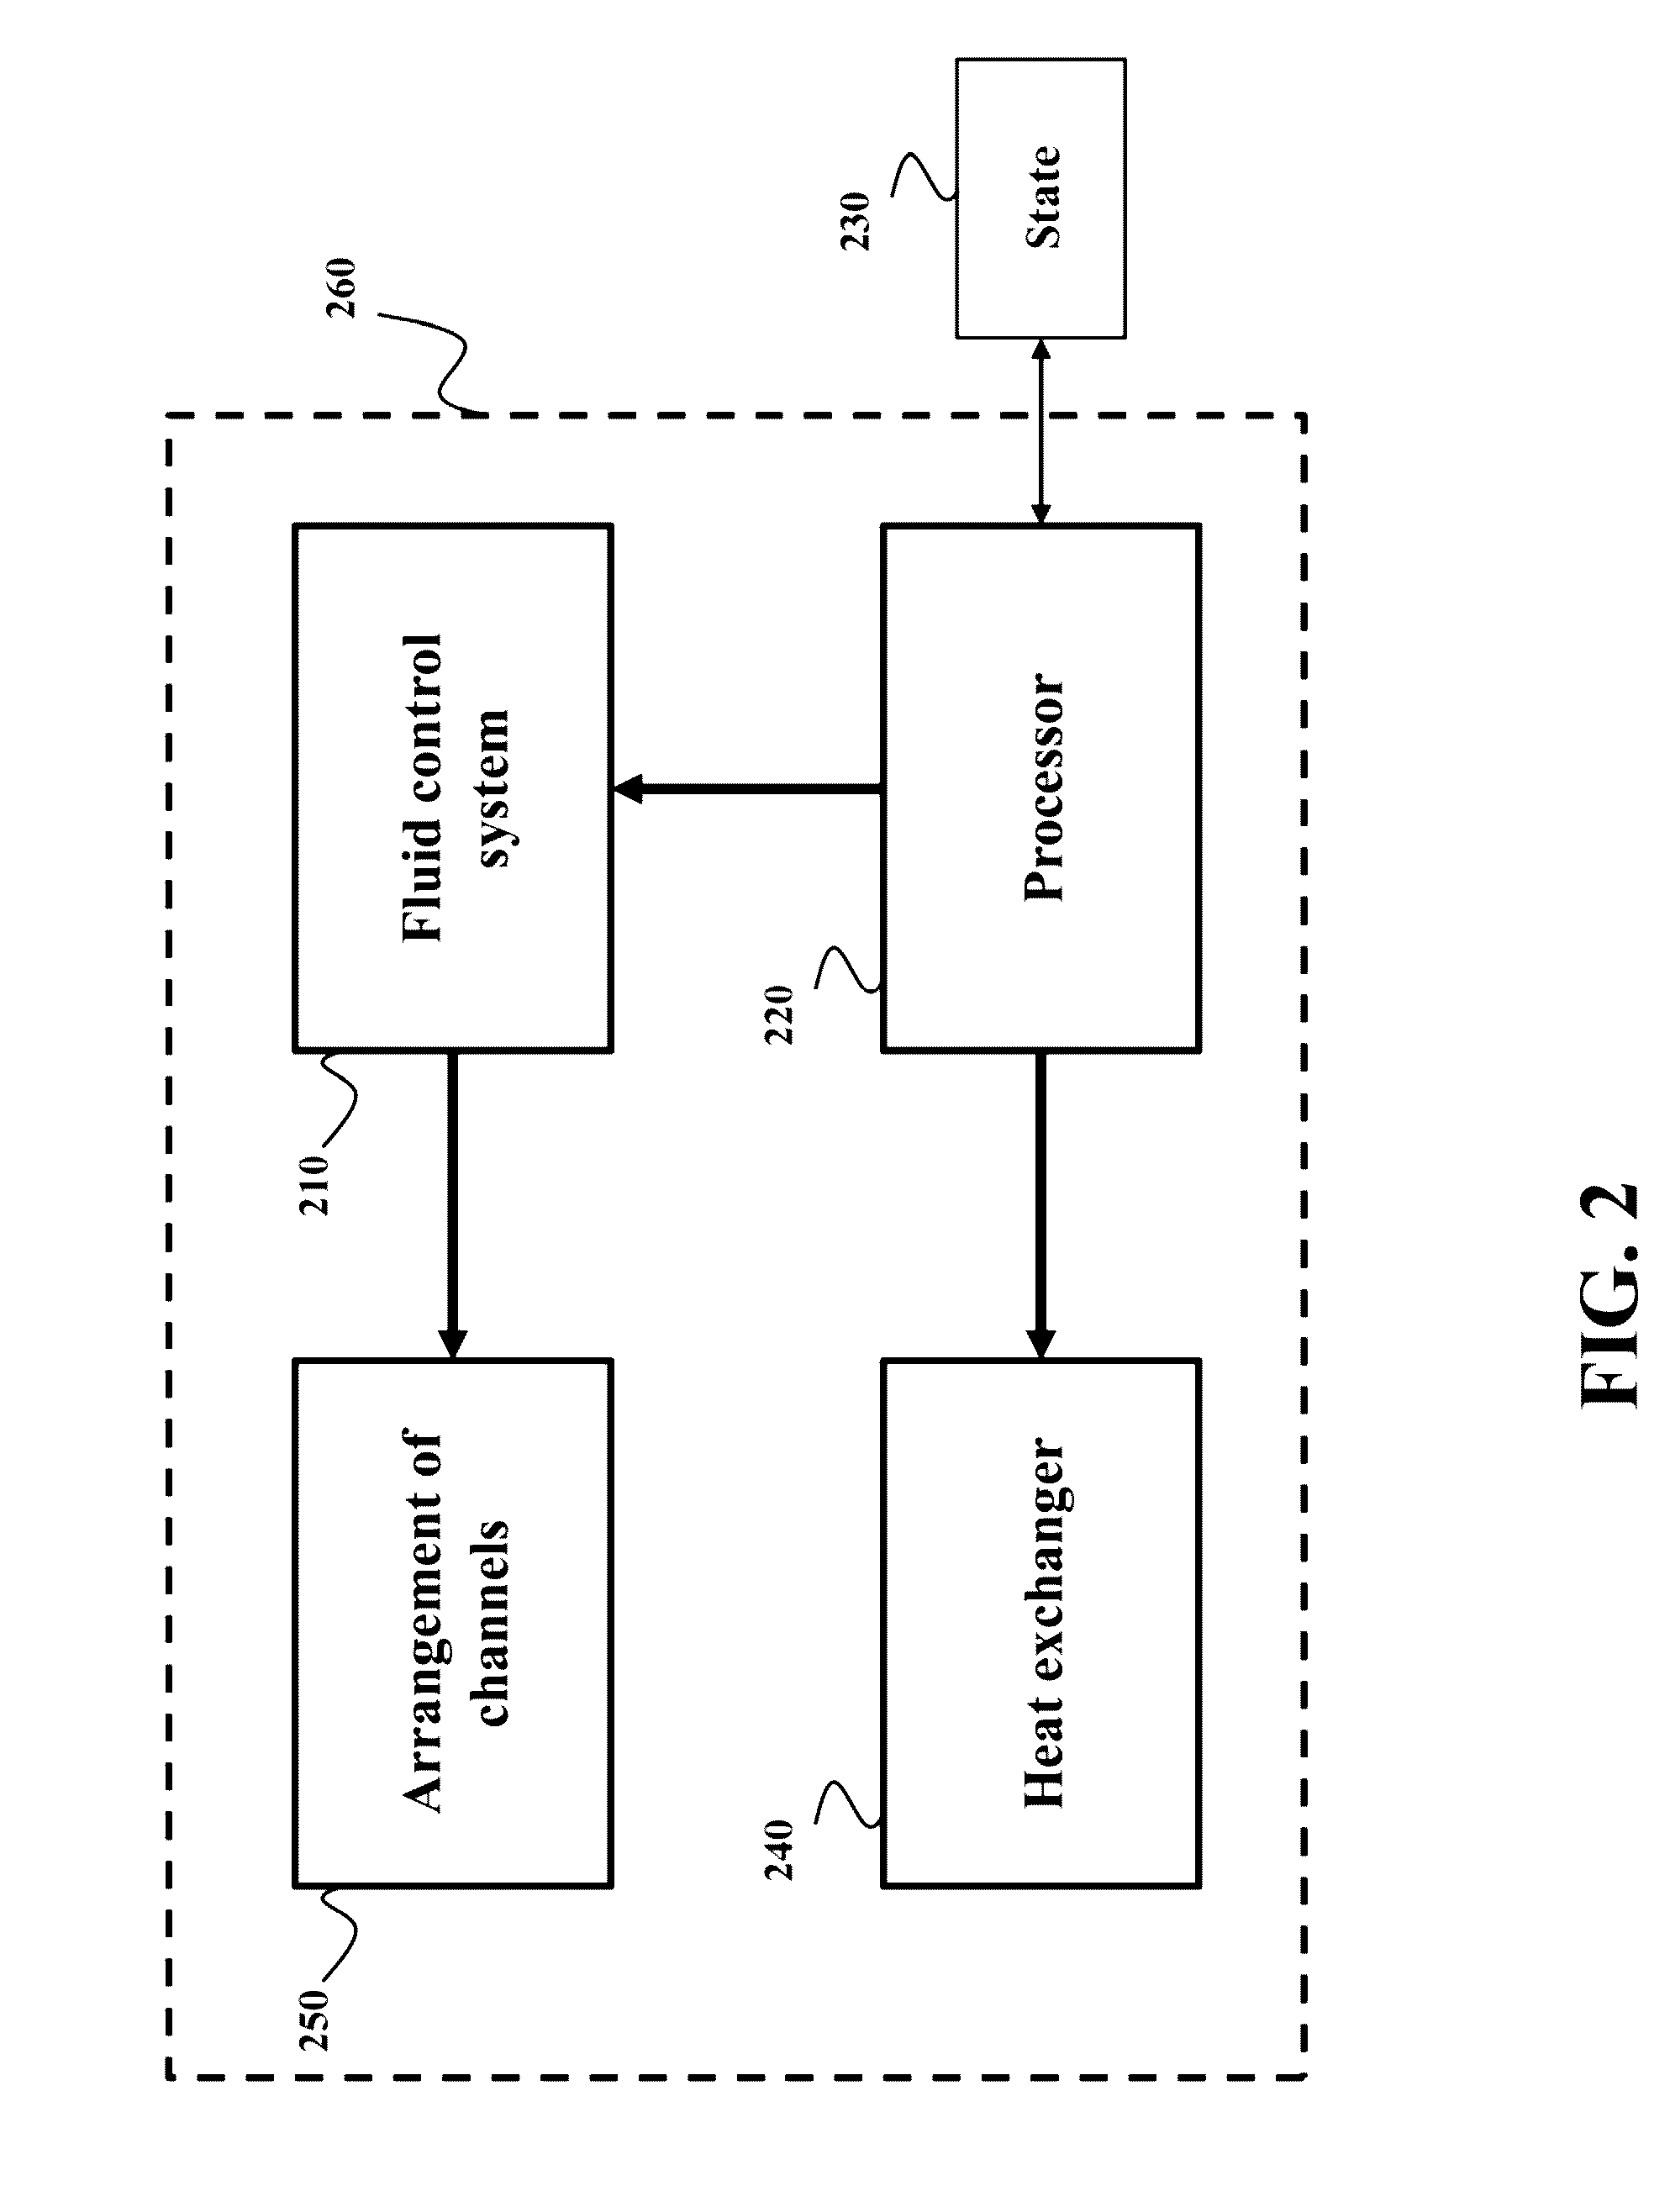 System and method for controlling temperature and humidity in multiple spaces using liquid desiccant